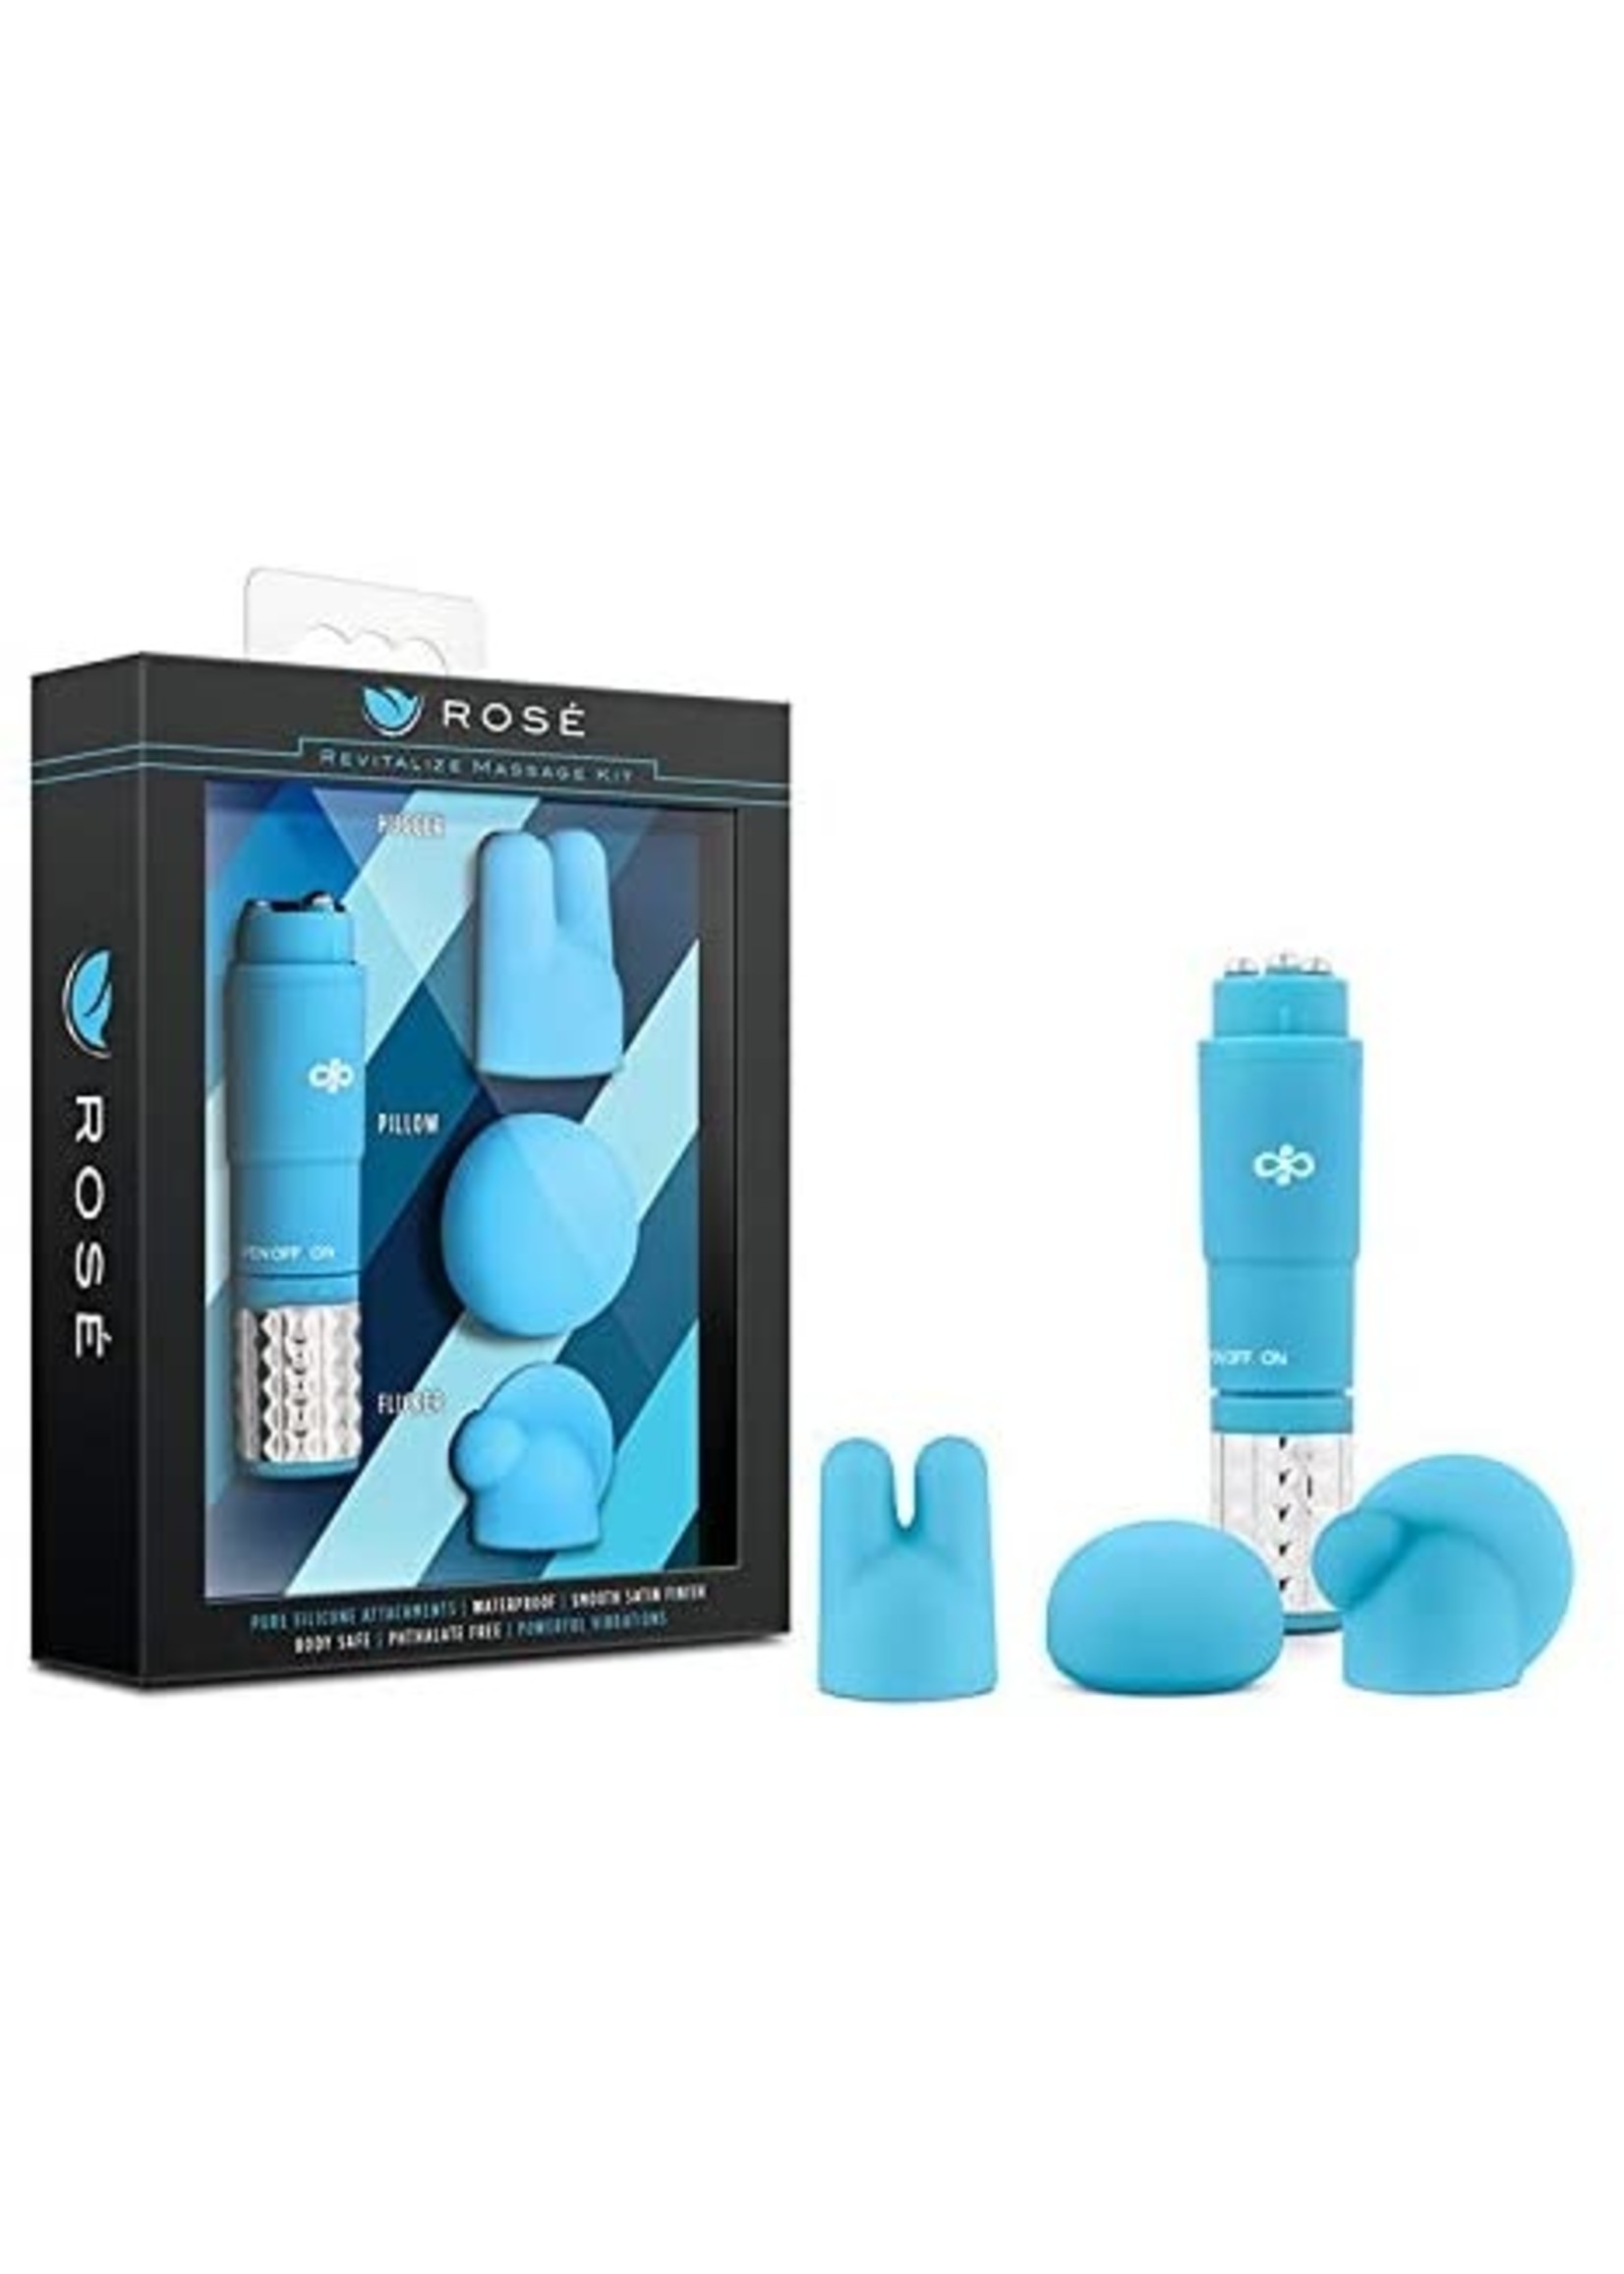 Rose Revitalize Massage Kit with Silicone Attachments